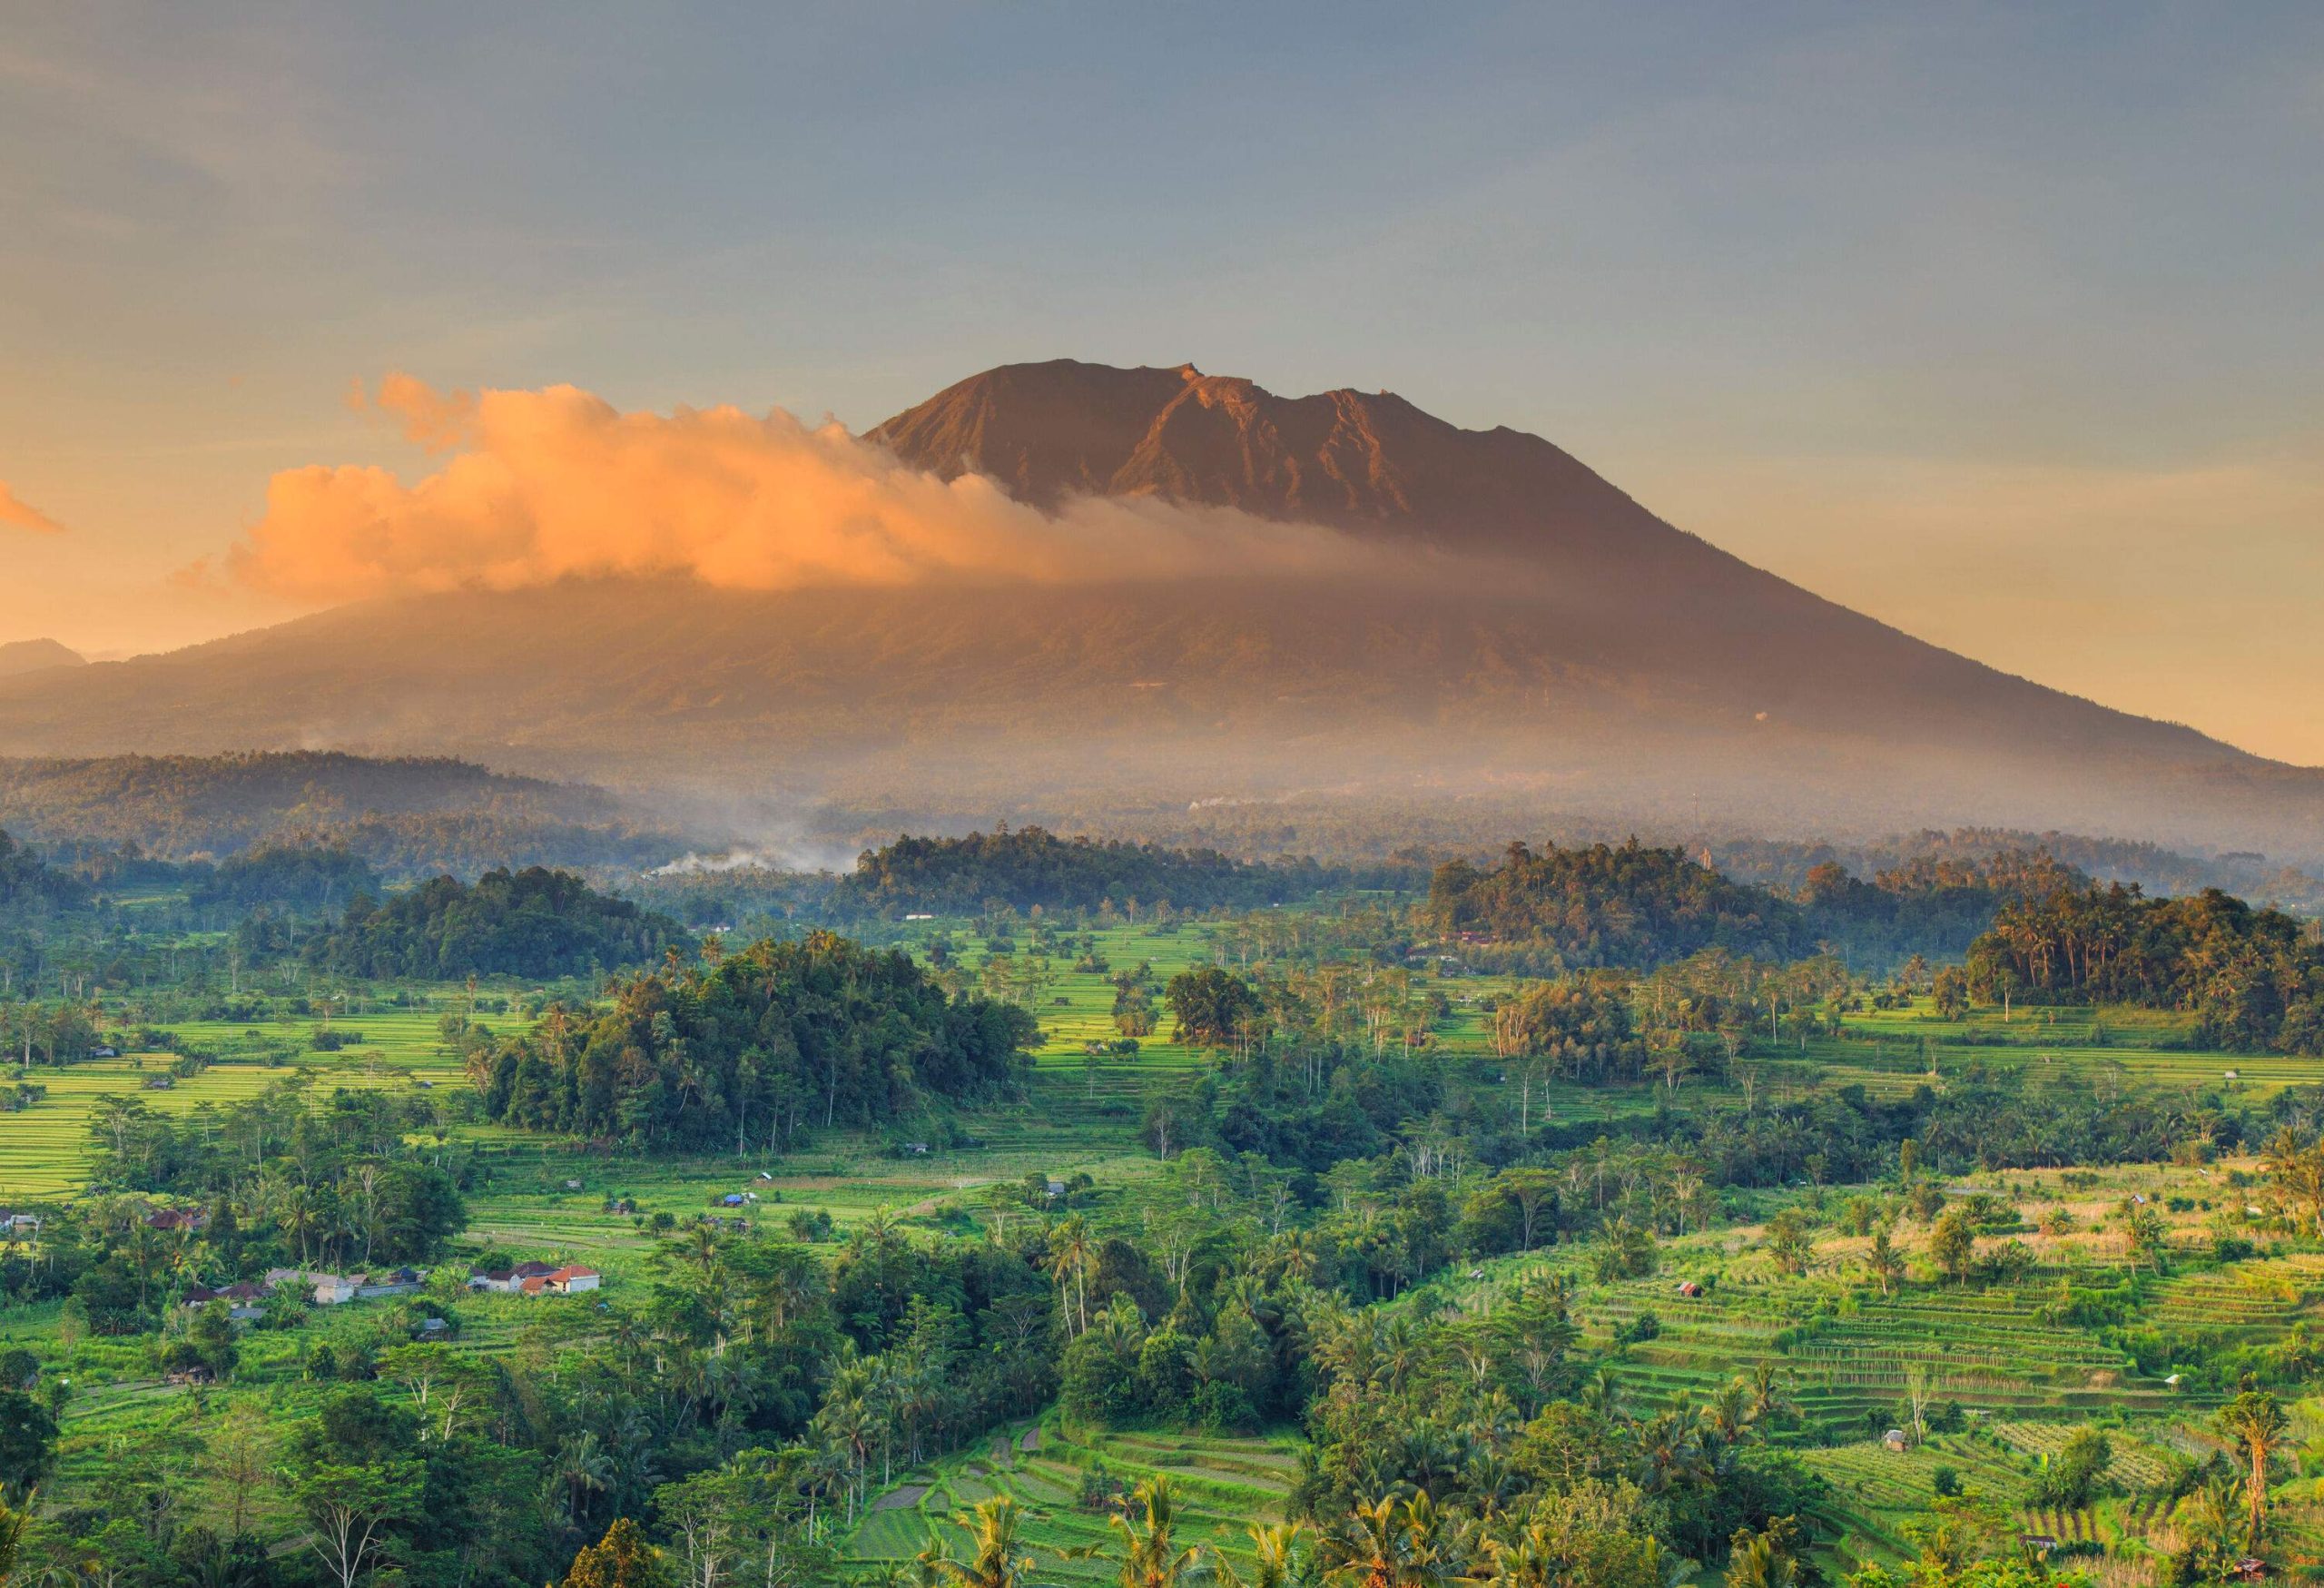 An awe-inspiring volcano with a cloud-kissed peak stands in a gorgeous natural landscape with terrace fields cascading down the hills and lush trees dotting the landscape.